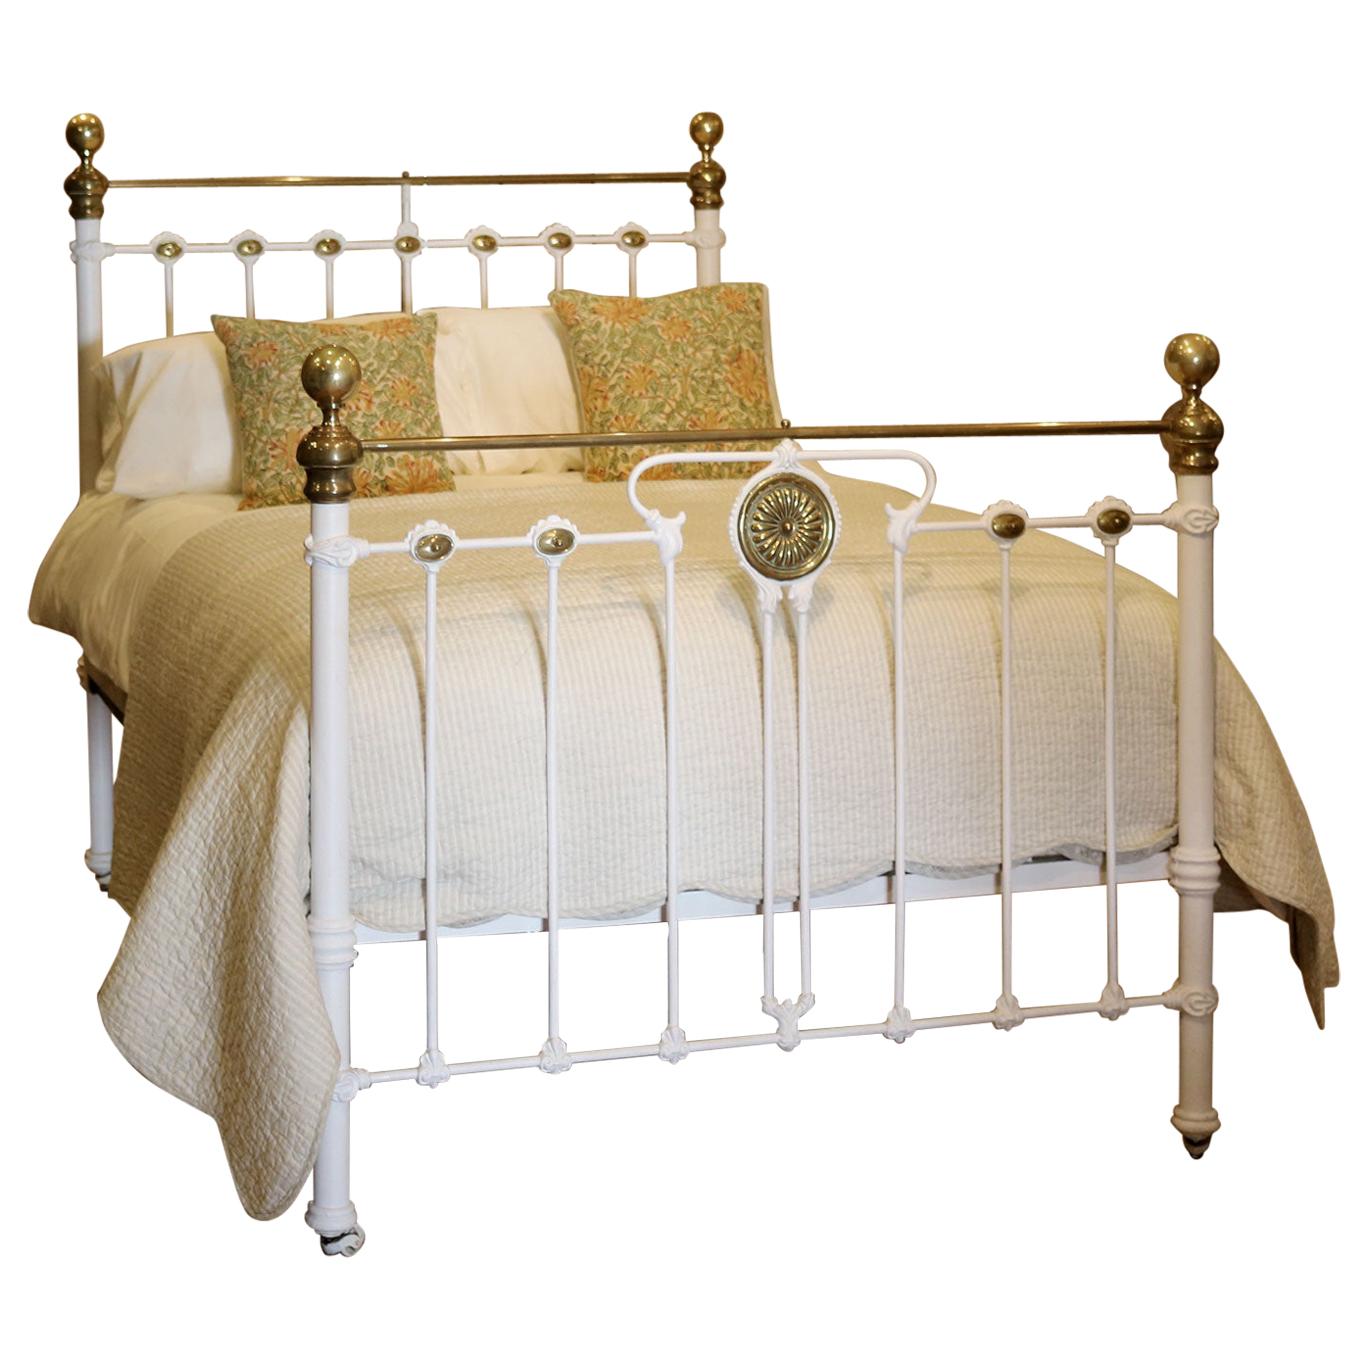 Late Victorian Brass and Cast Iron Antique Bed in Cream, MD104